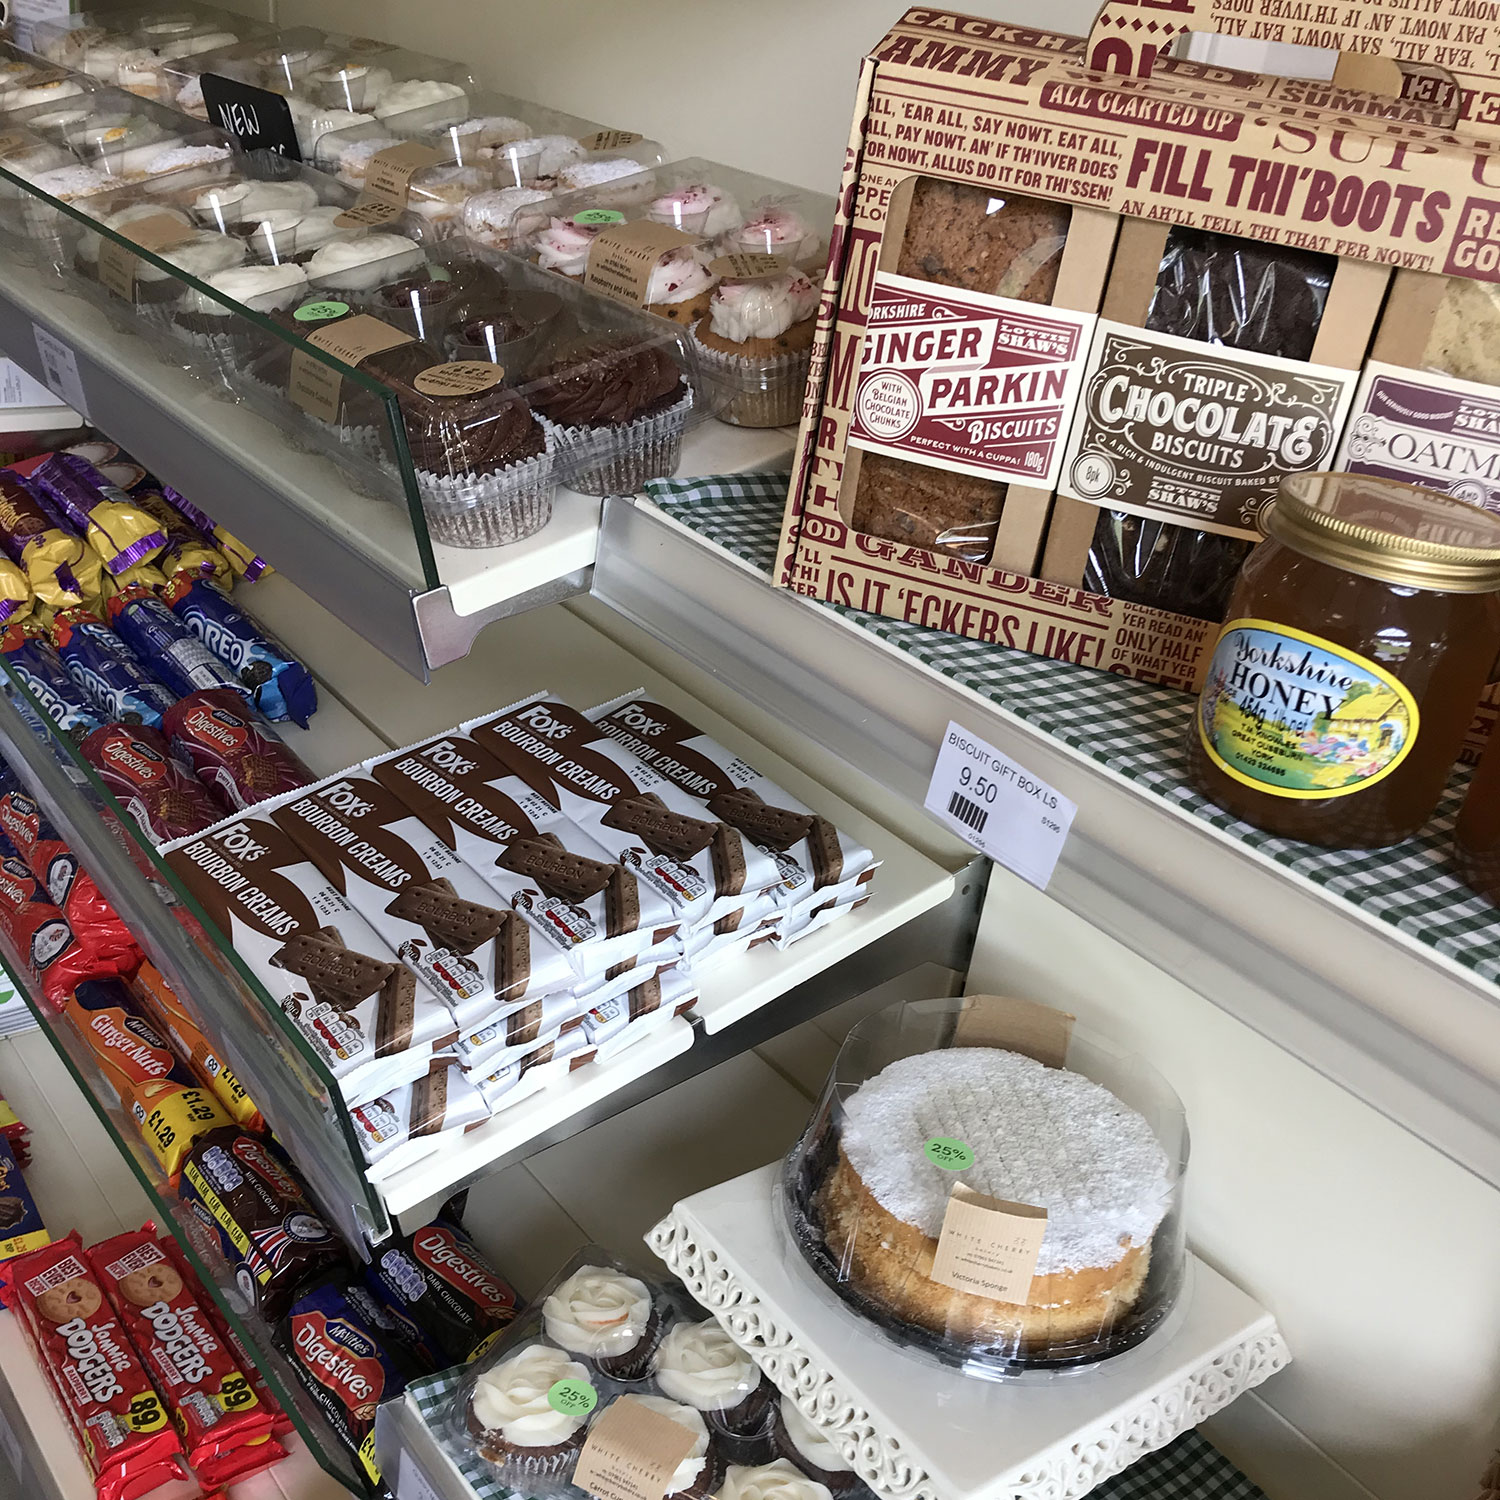 Our cake and biscuits selection covers all tastes and budgets.